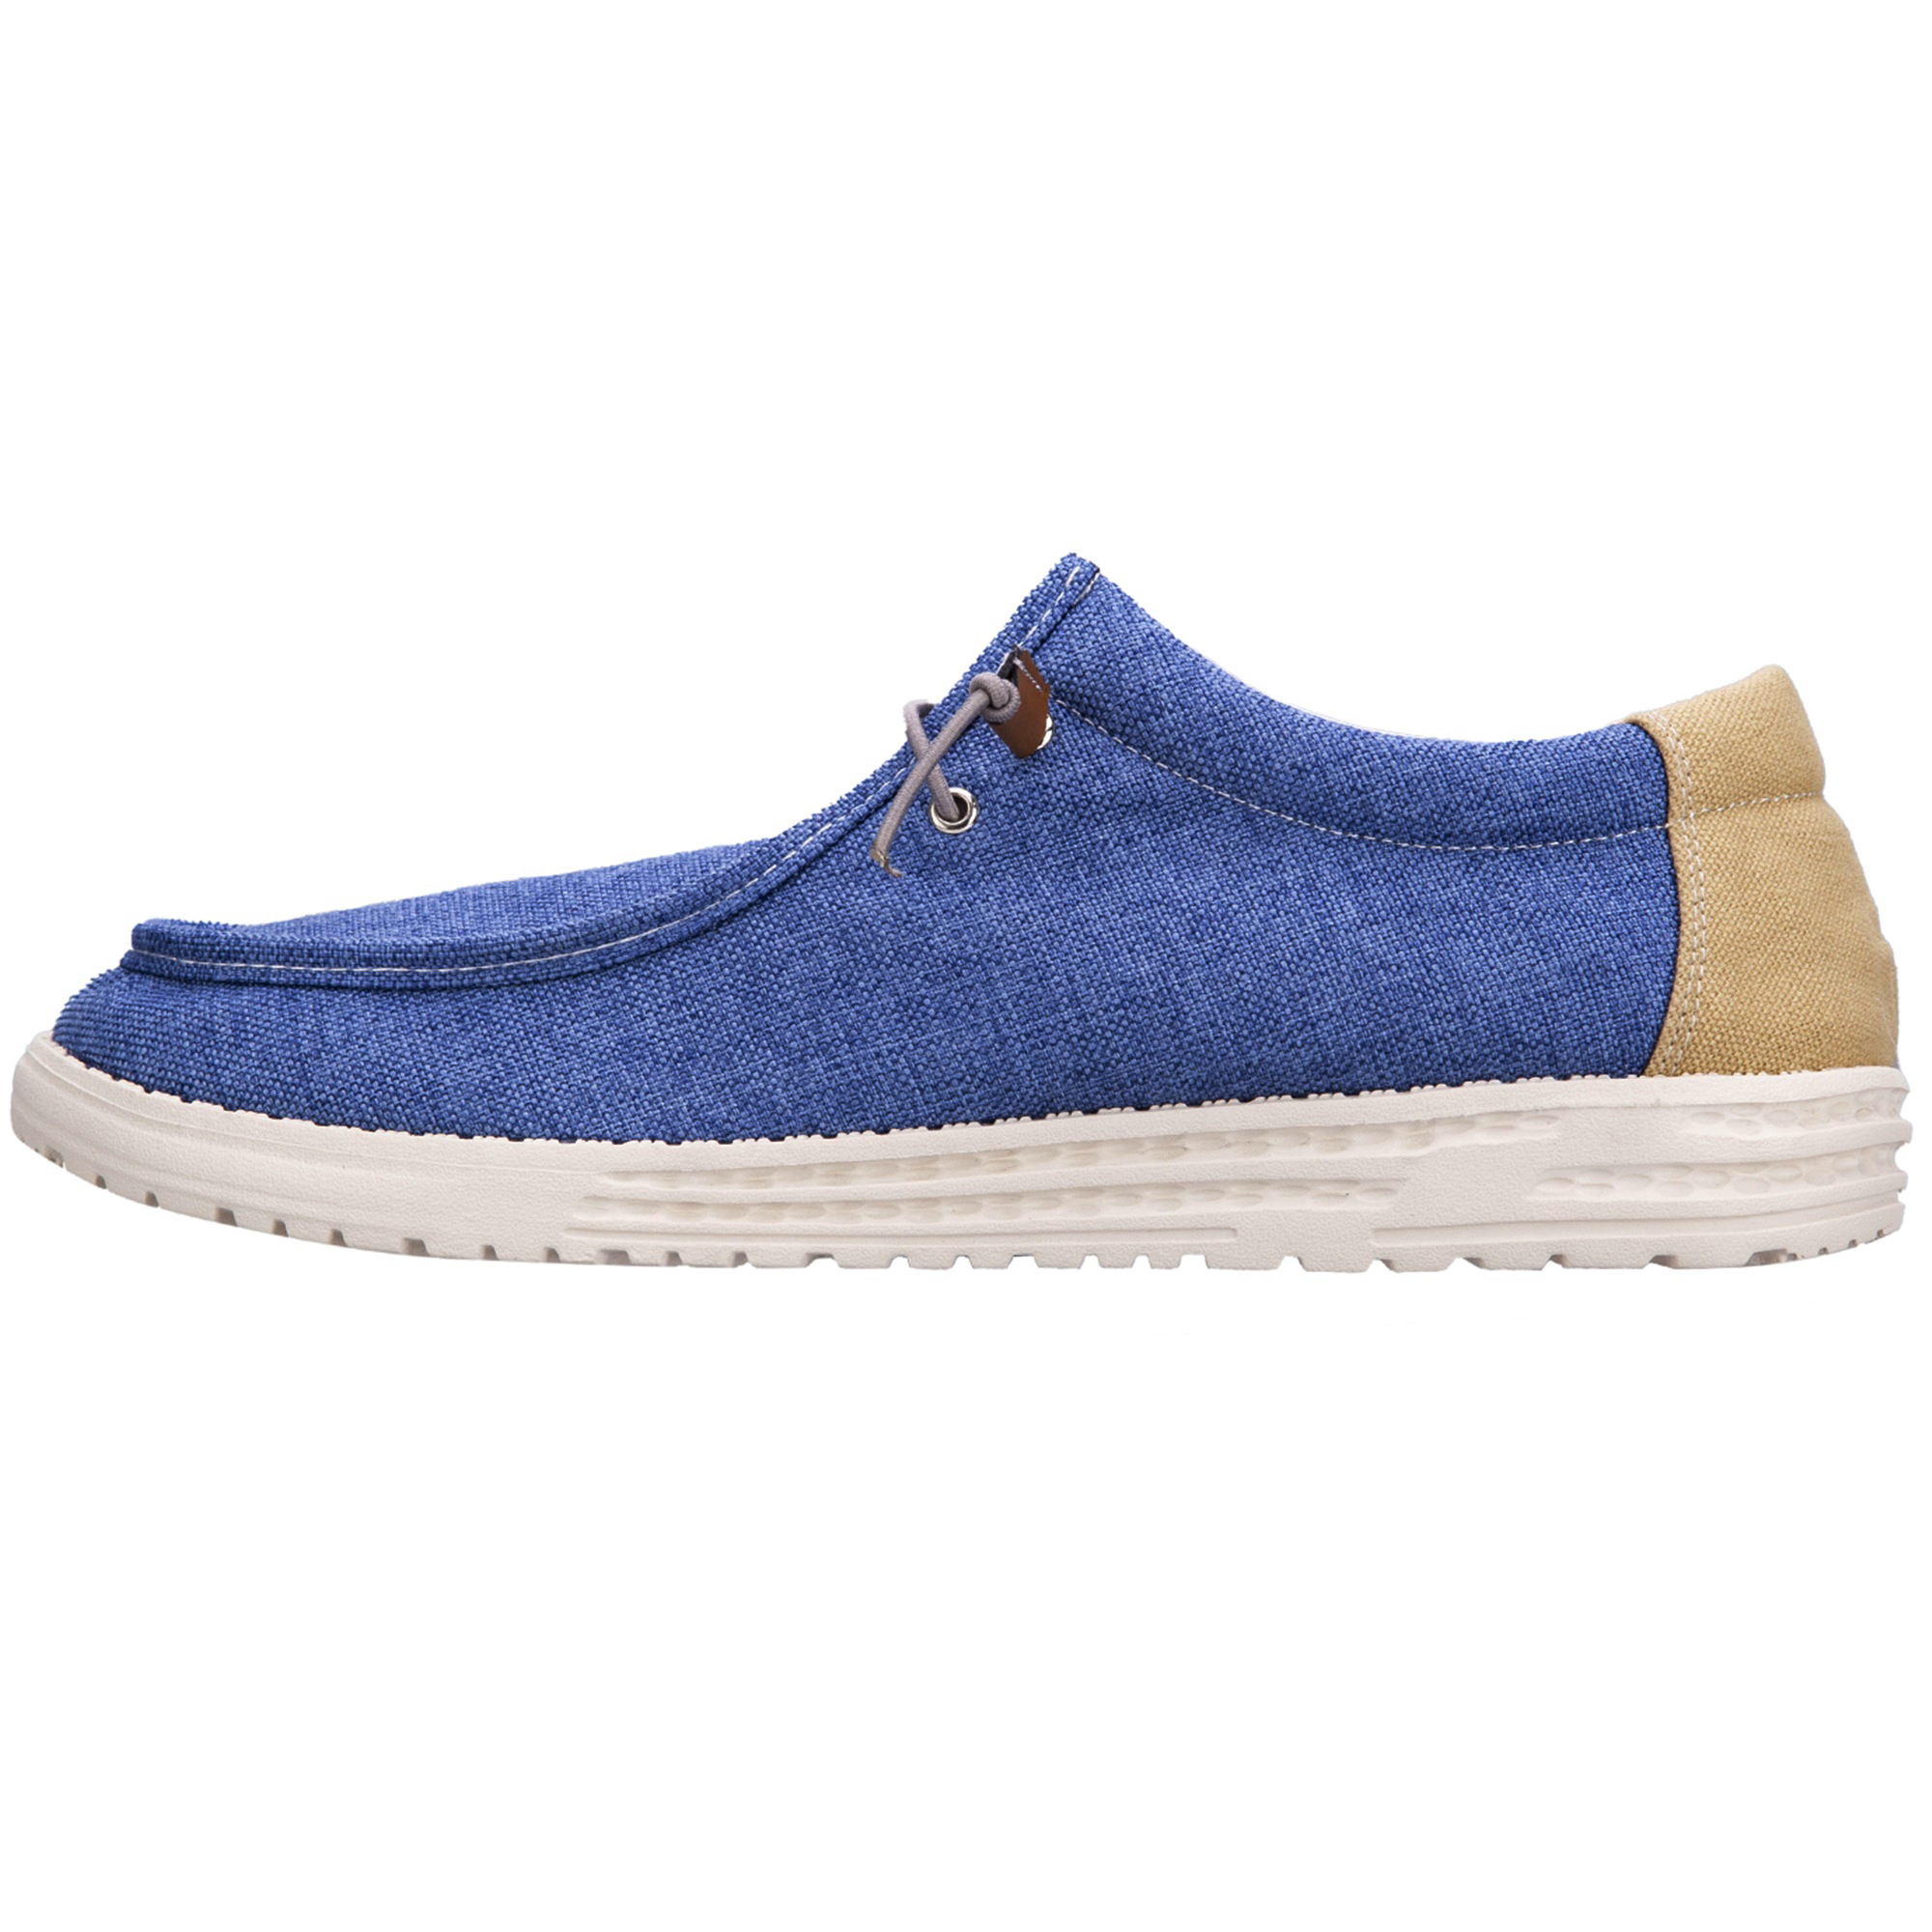 Alpine Swiss Flynn Mens Boat Shoes Casual Slip On Moccasin Loafers Sailing Deck Shoe So Light It Floats On Water - image 4 of 7